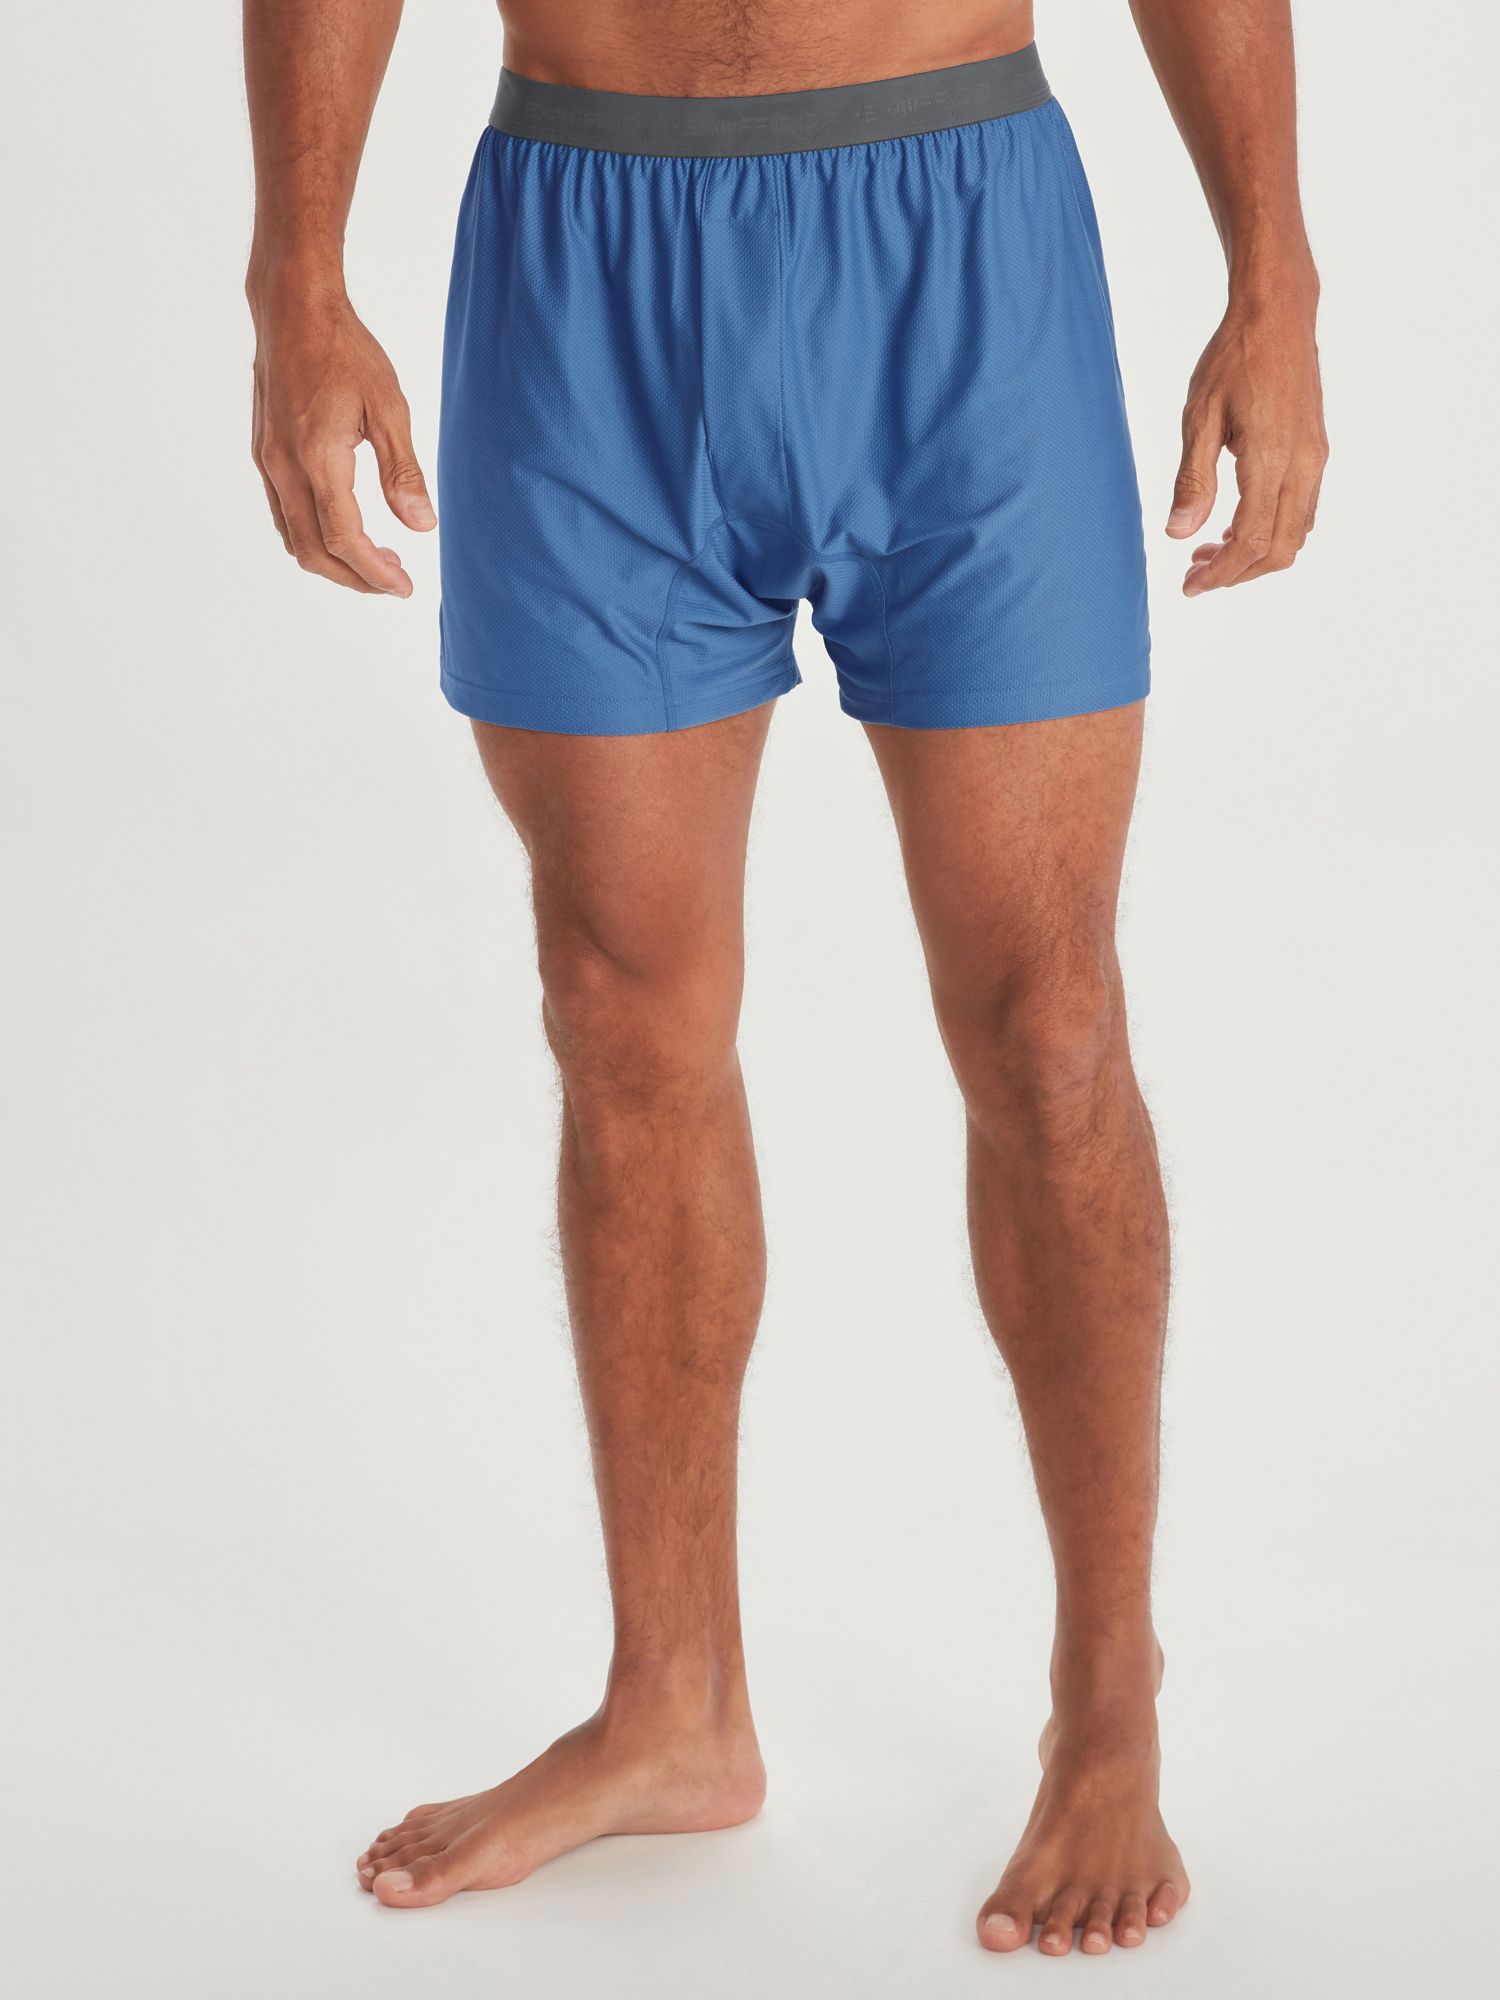 ExOfficio Mens That's Fly Boxers/Sage - Andy Thornal Company